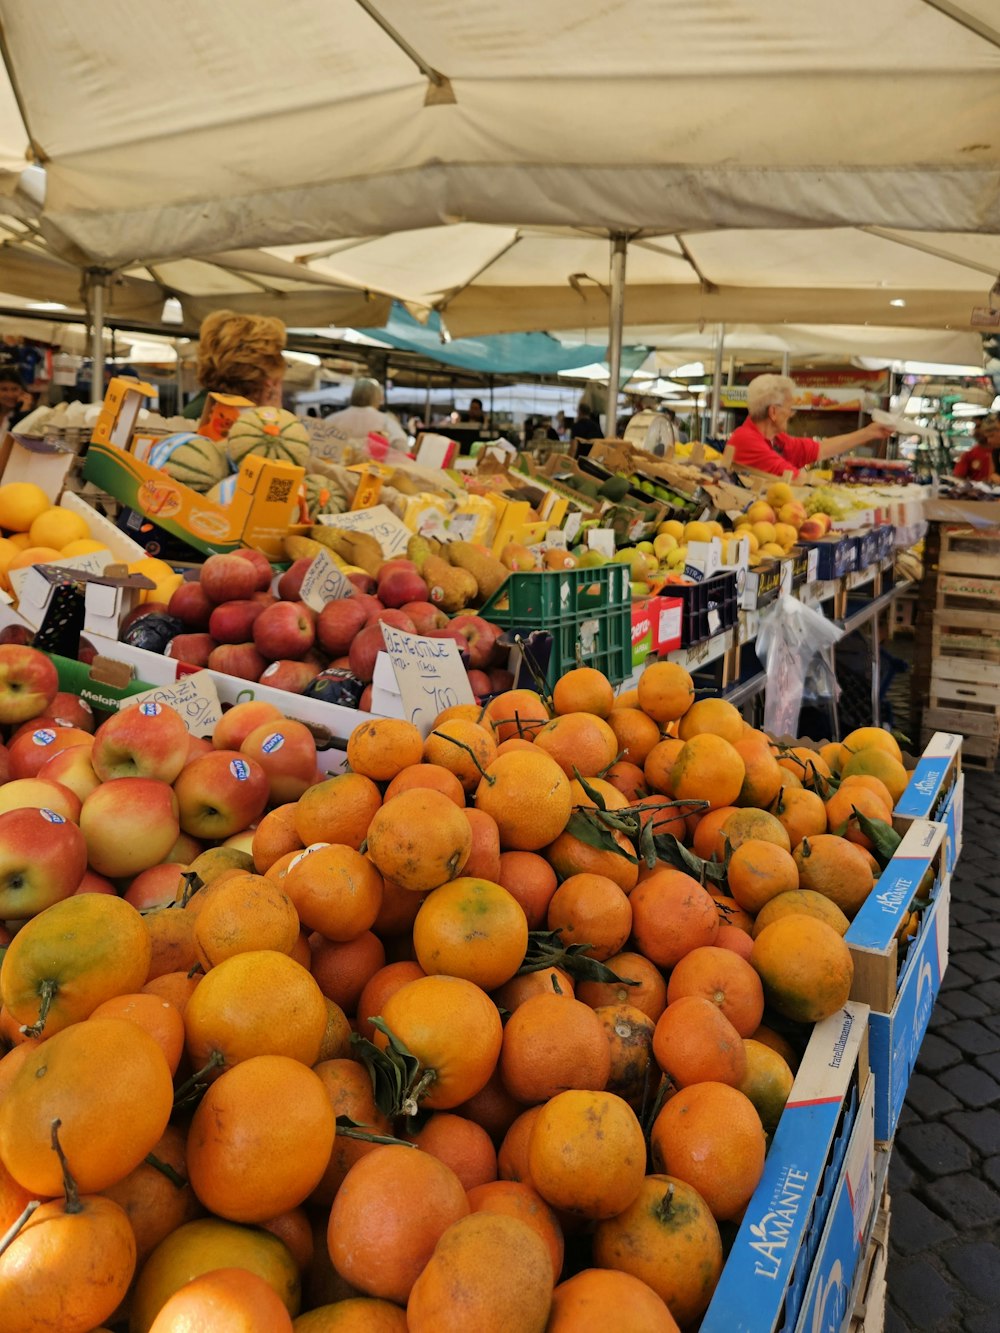 a fruit stand with oranges and apples for sale